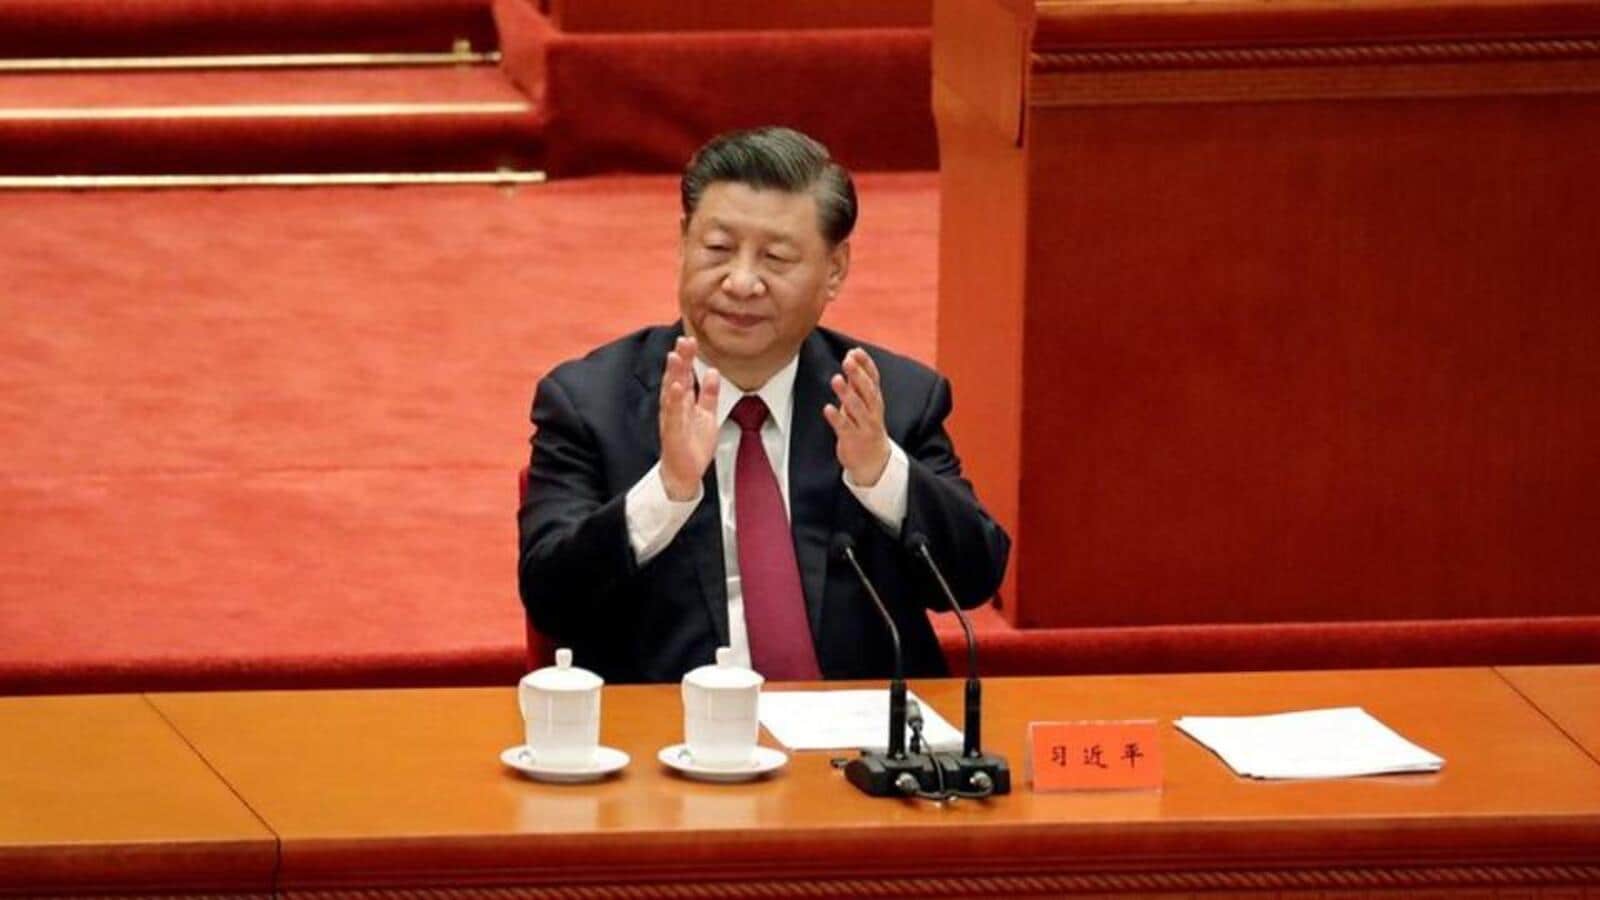 China: Xi calls corruption a ‘tumour’, warns top Communist leadership to be clean